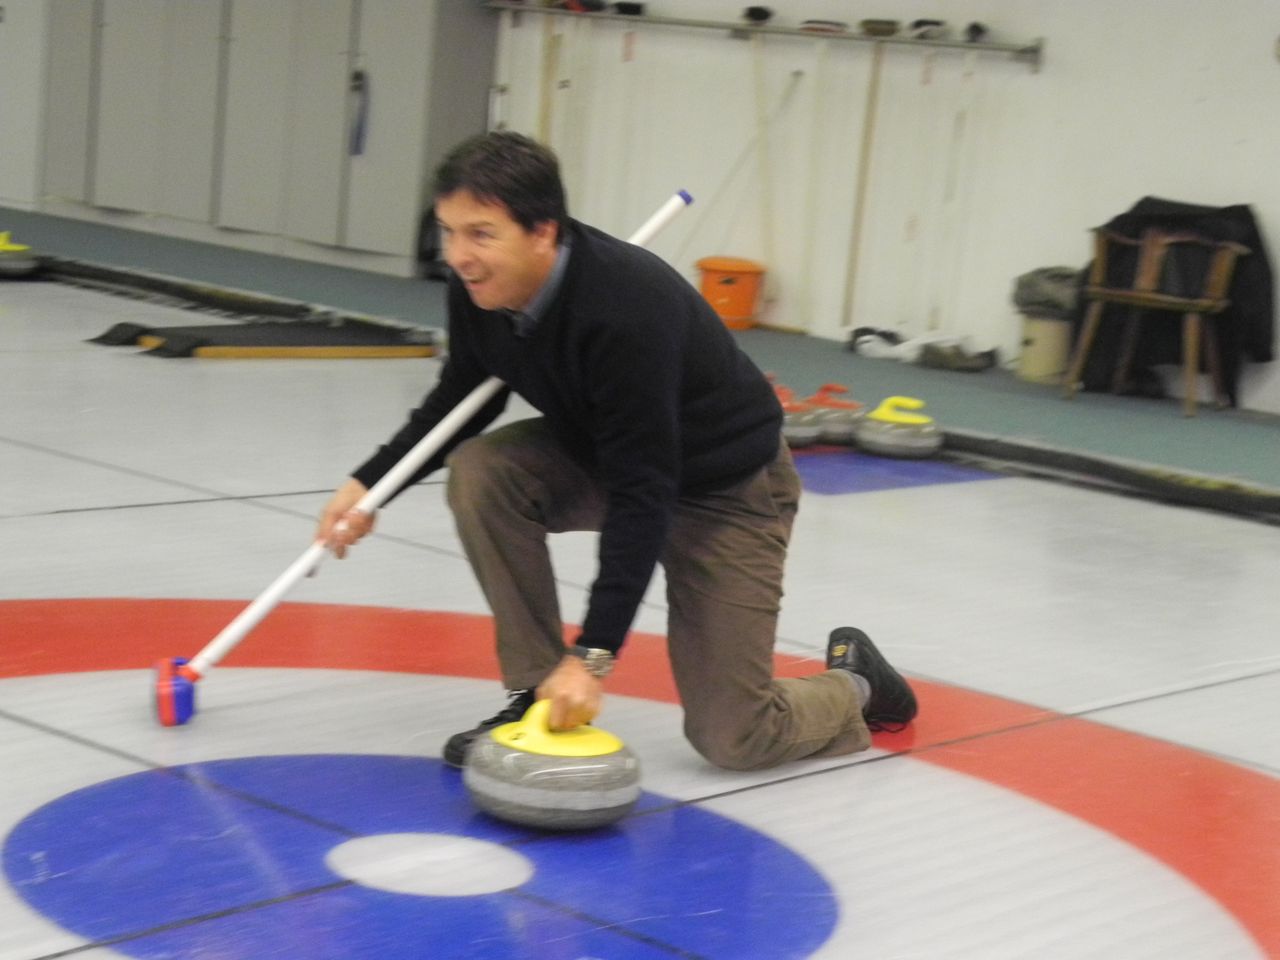 /photos/2013/S01_Curling/121011_2106-S01-MD_19.jpg